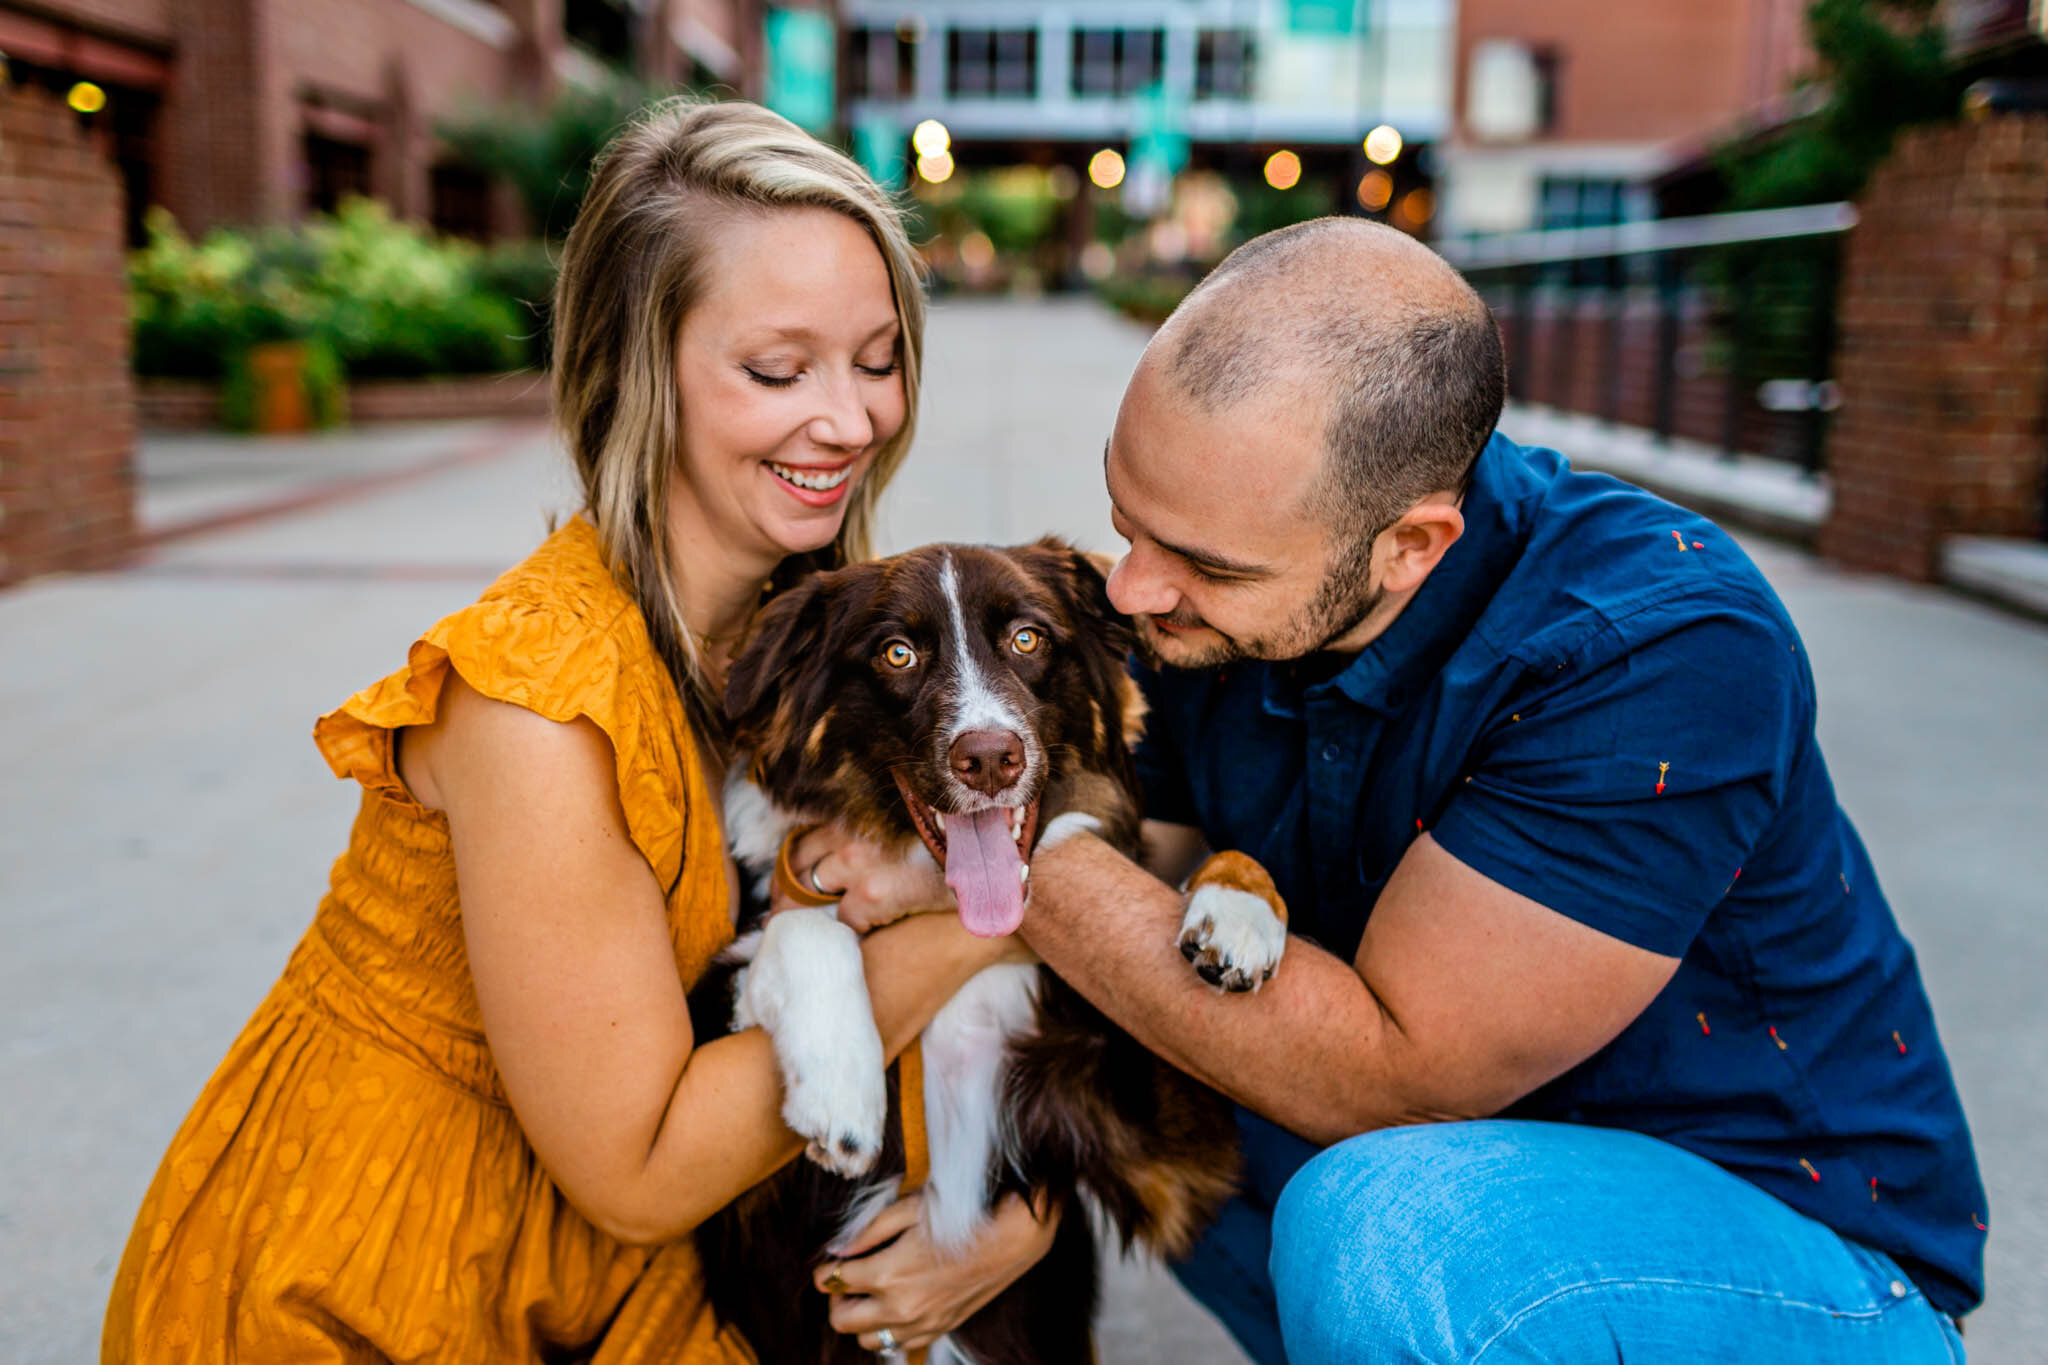 Durham Family Photographer | By G. Lin Photography | Family hugging dog at American Tobacco Campus